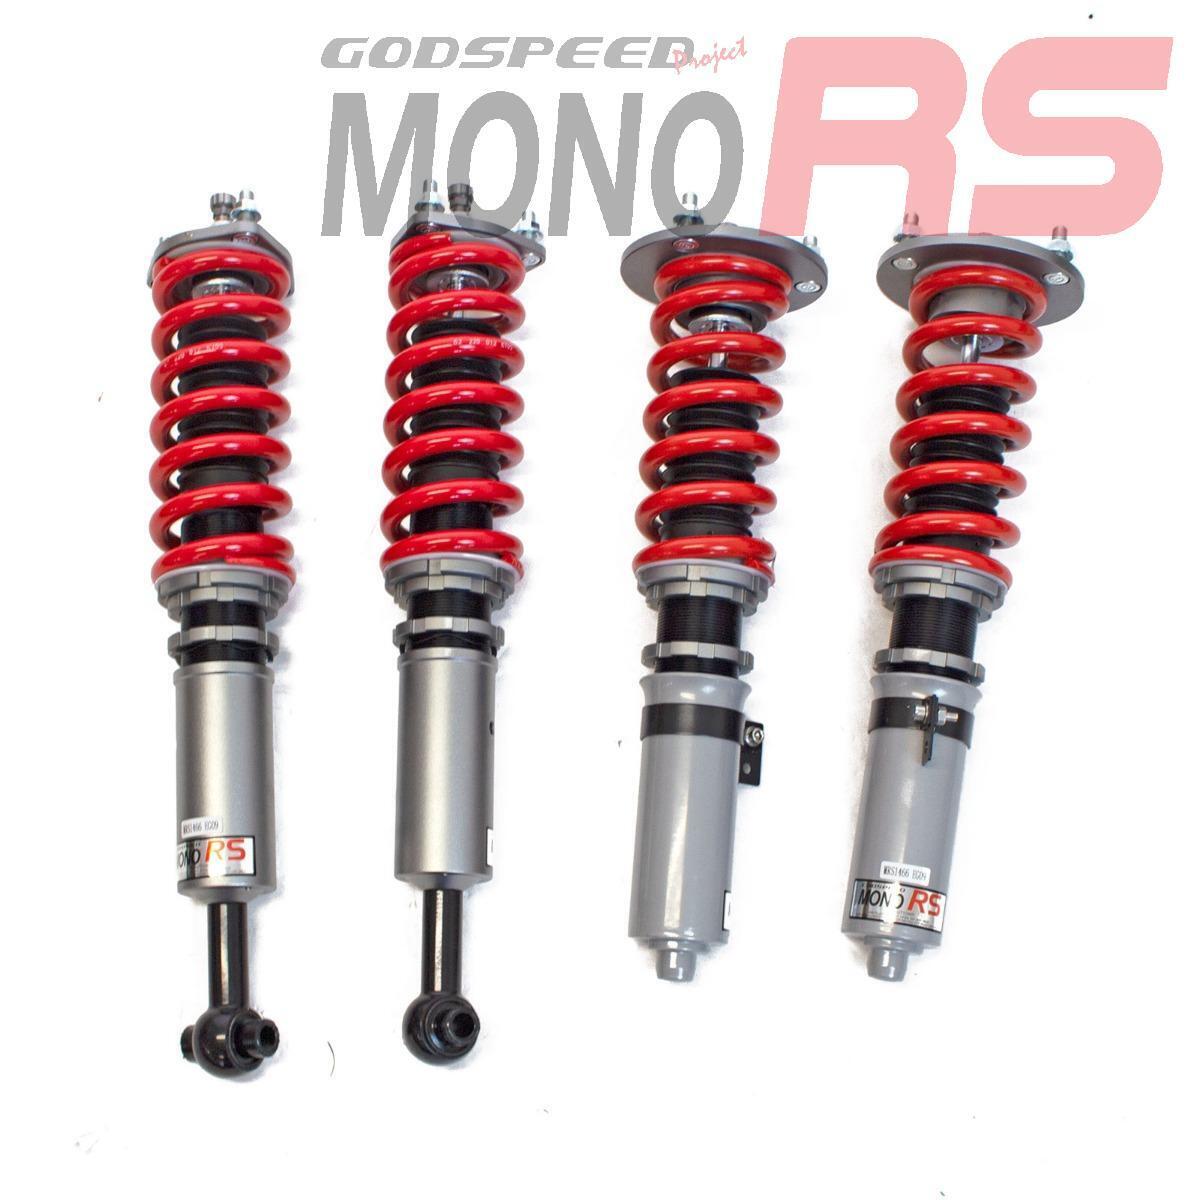 Godspeed MonoRS Coilovers for Lexus IS AWD 06-13 Fully Adjustable